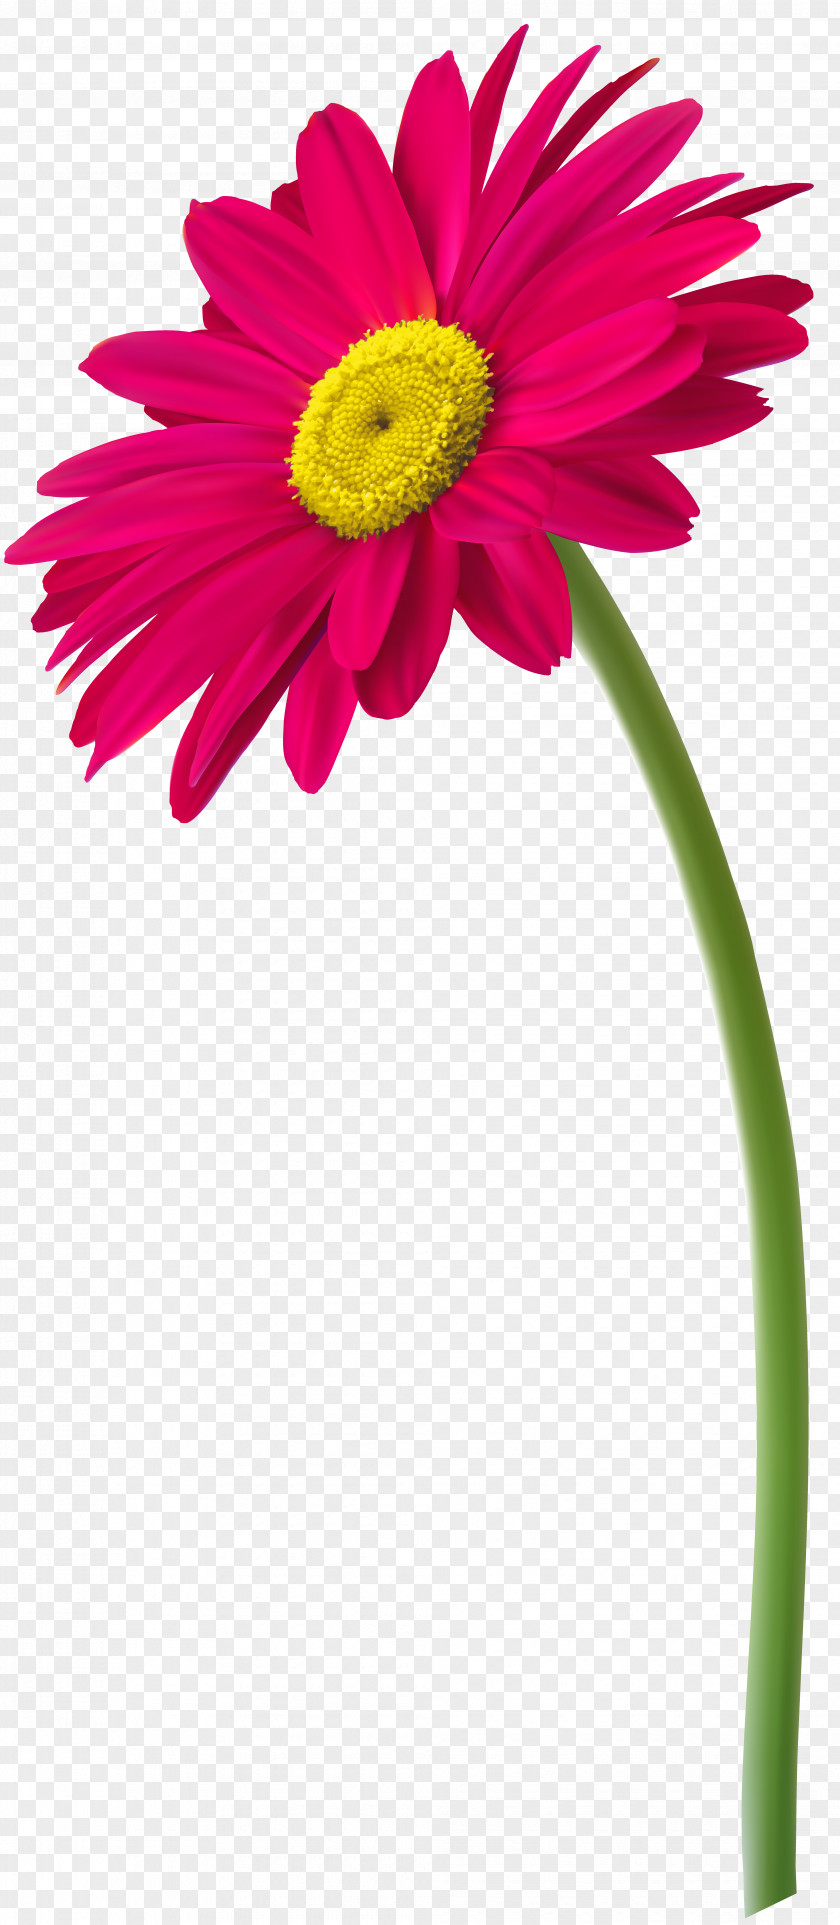 Flower Transvaal Daisy Drawing Clip Art PNG